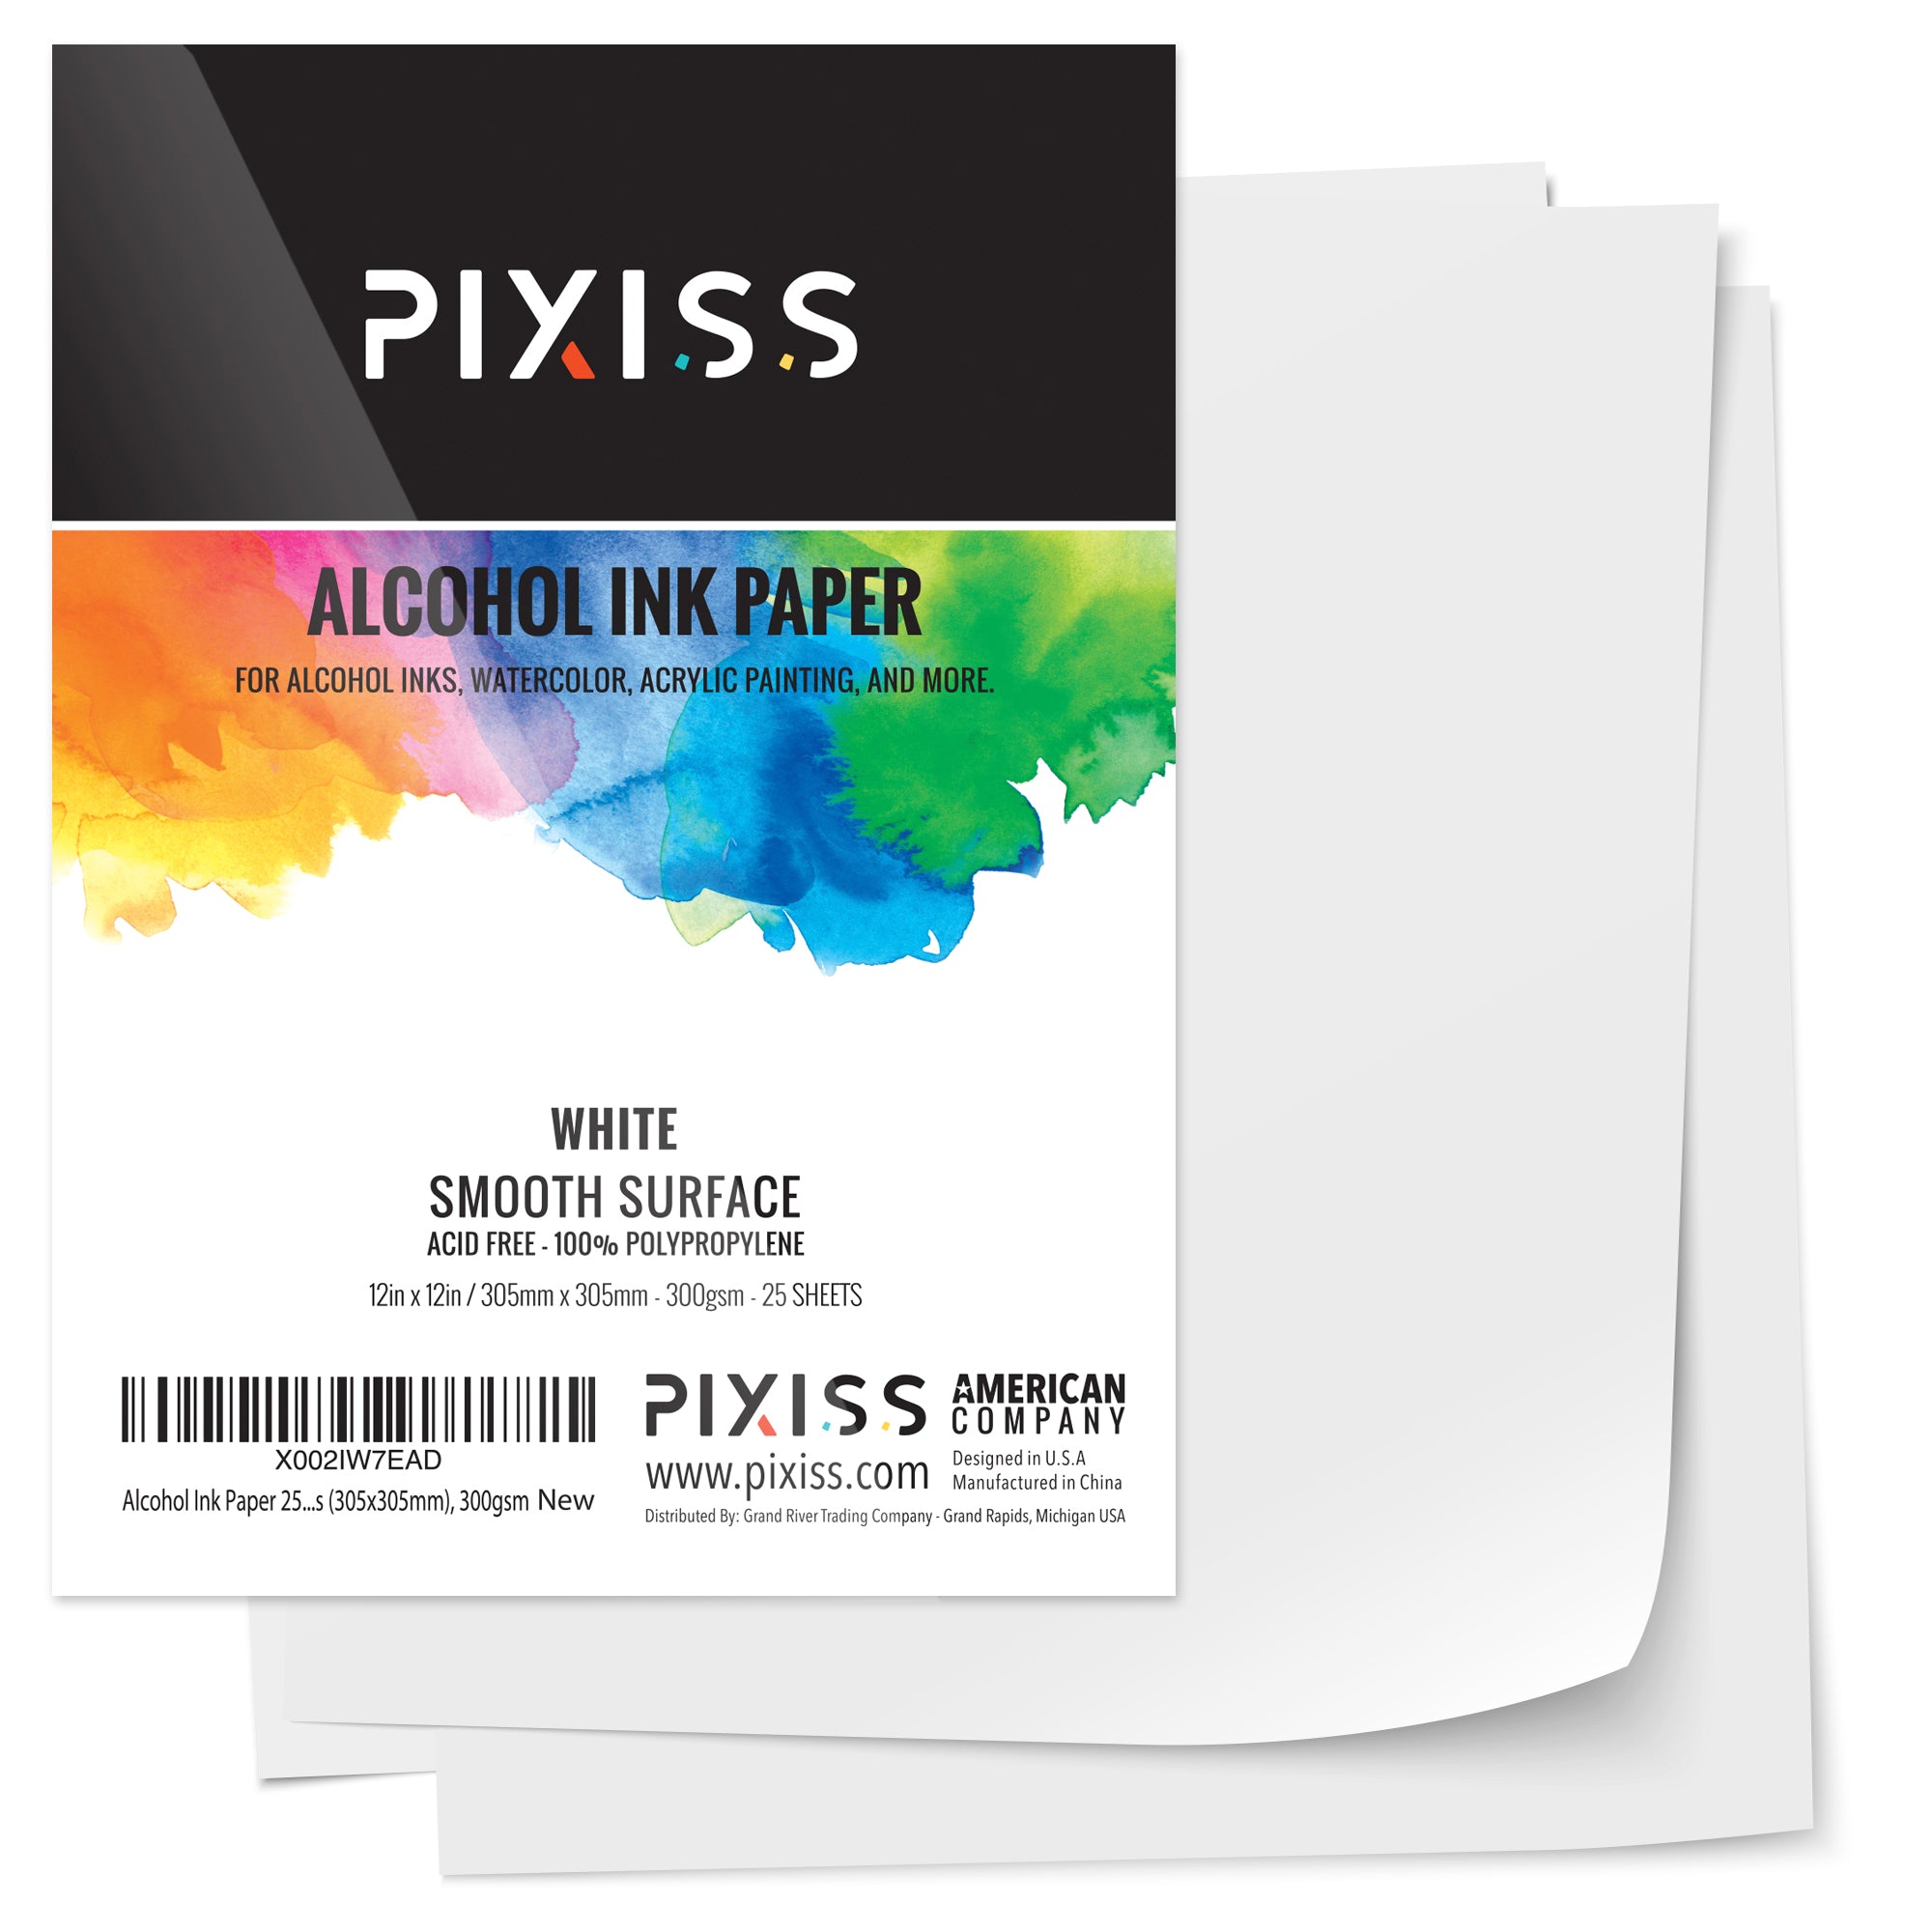 PIXISS Alcohol Inks - Individual 15ml Bottles – Pixiss